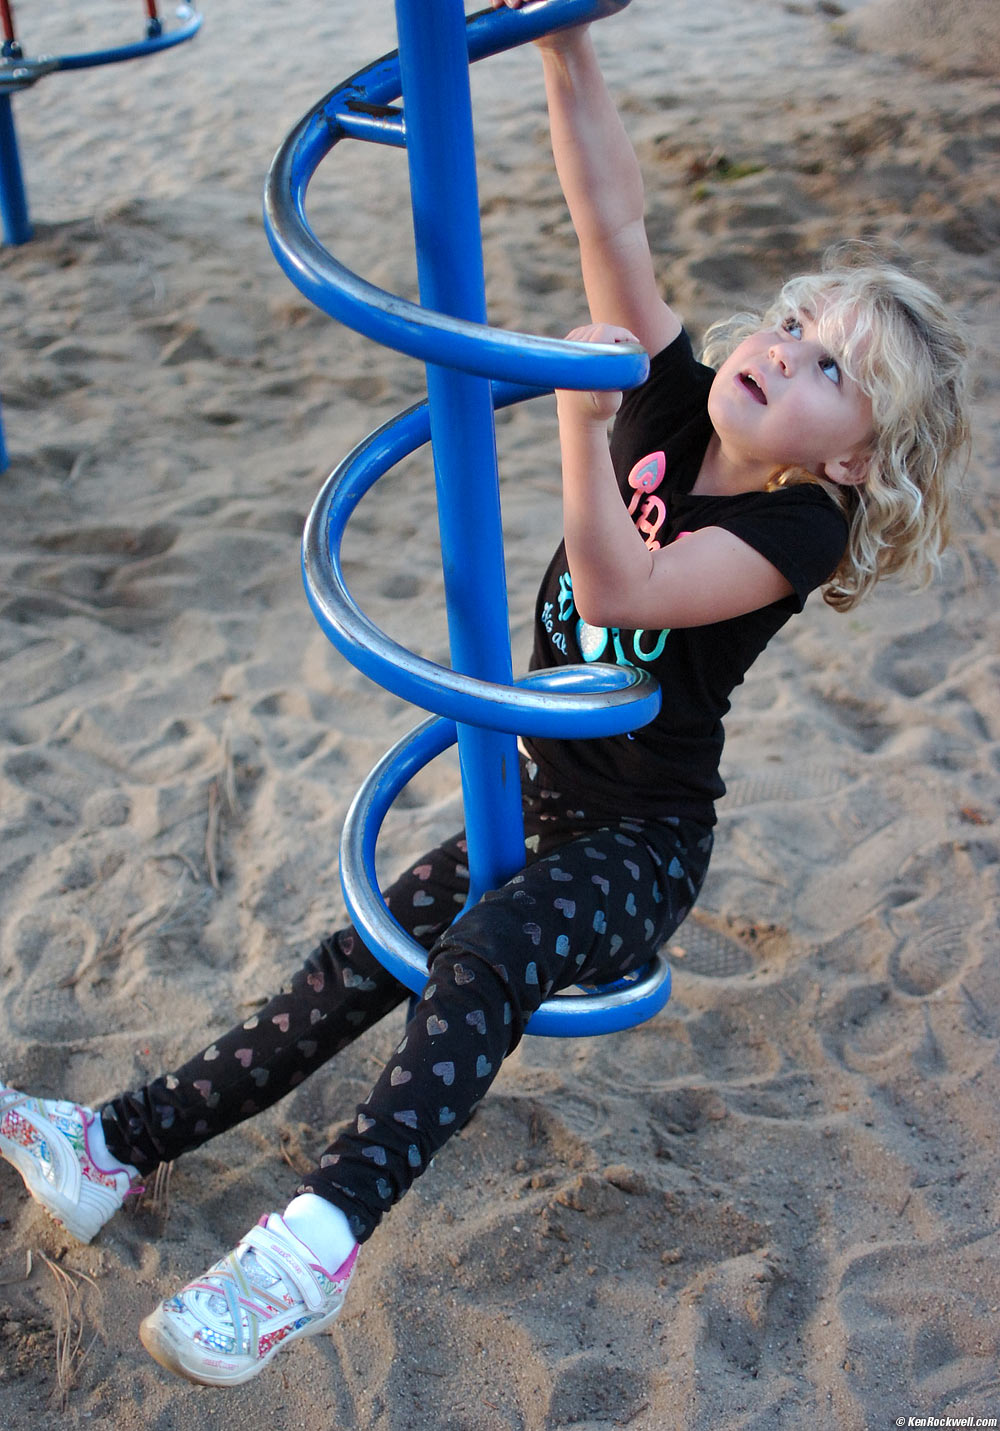 Katie climbs the curly-que at the park.